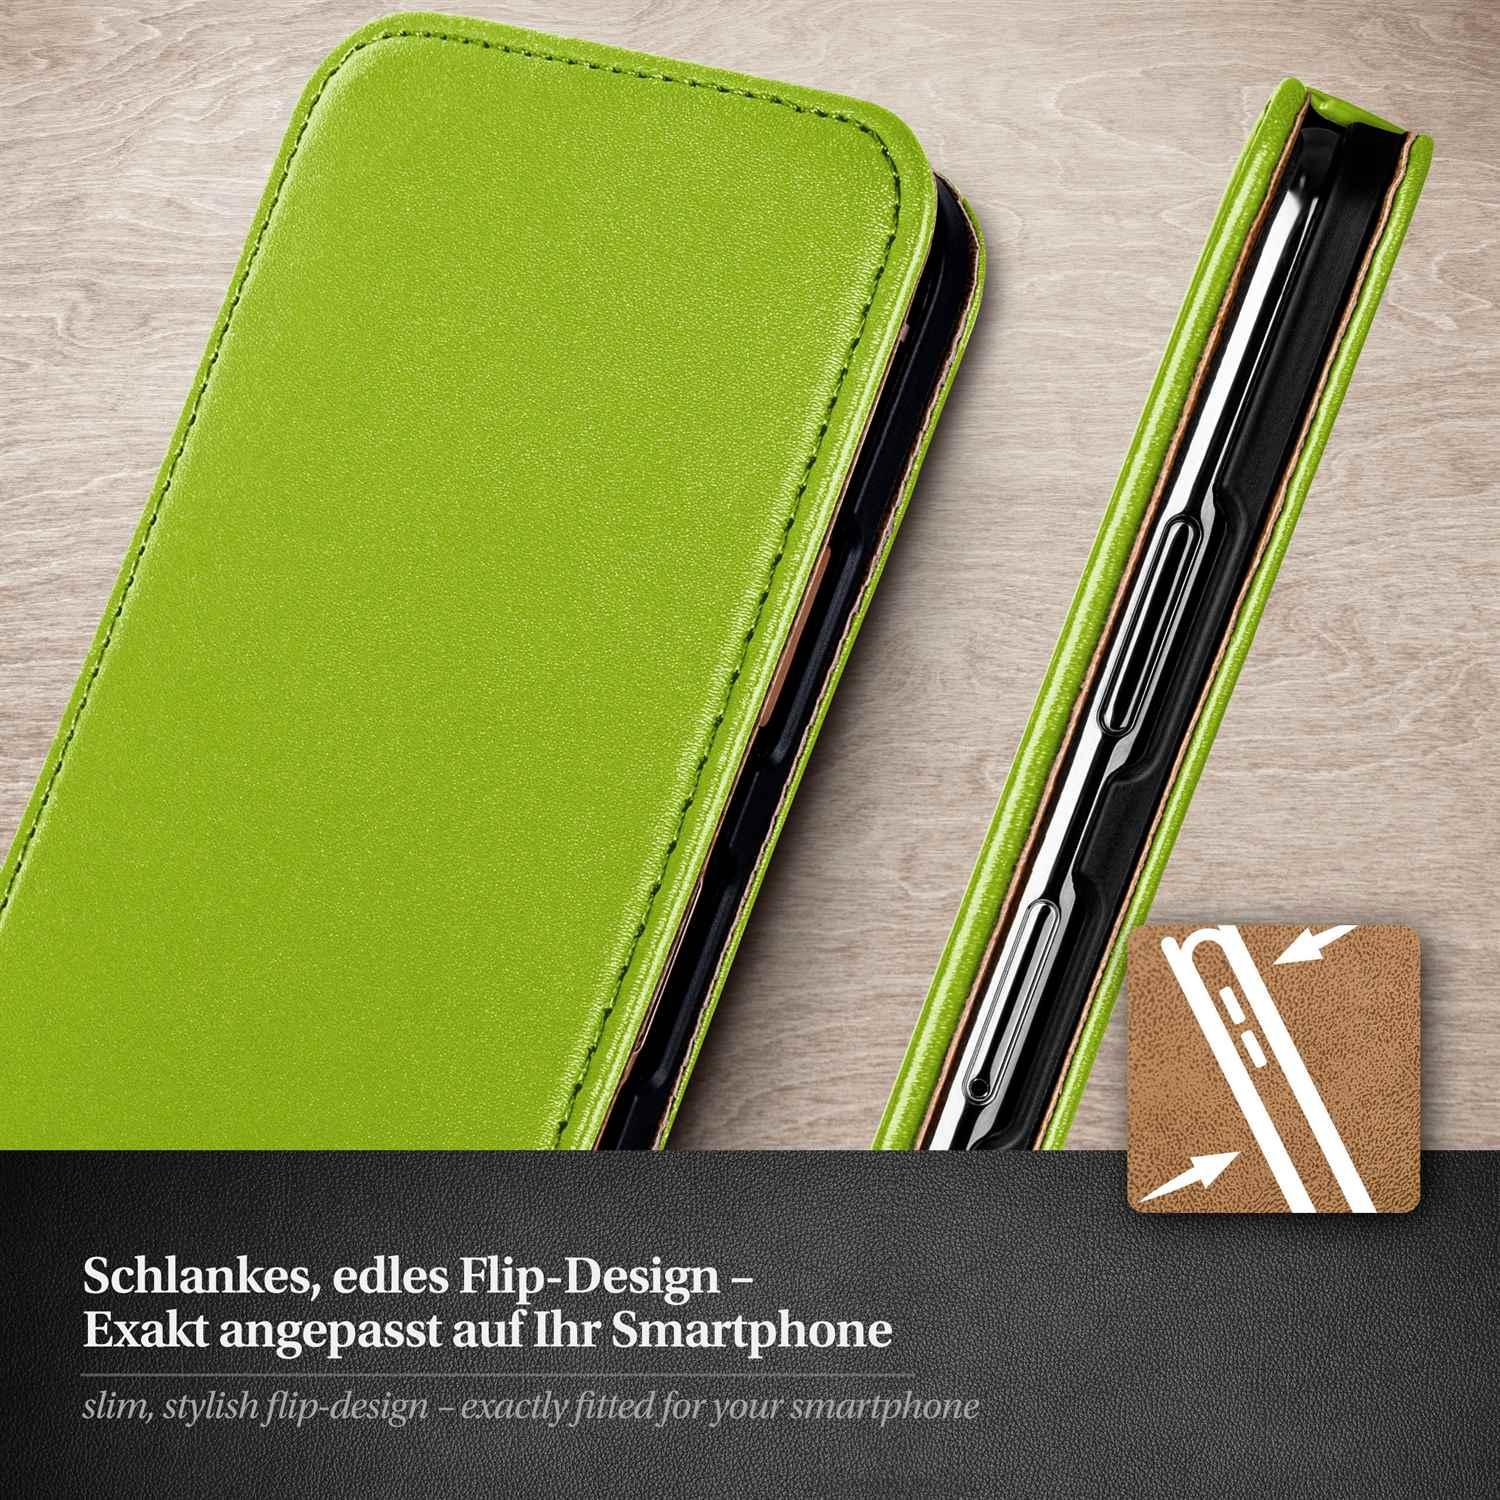 Case, Cover, Flip MOEX Lime-Green M7, One Flip HTC,